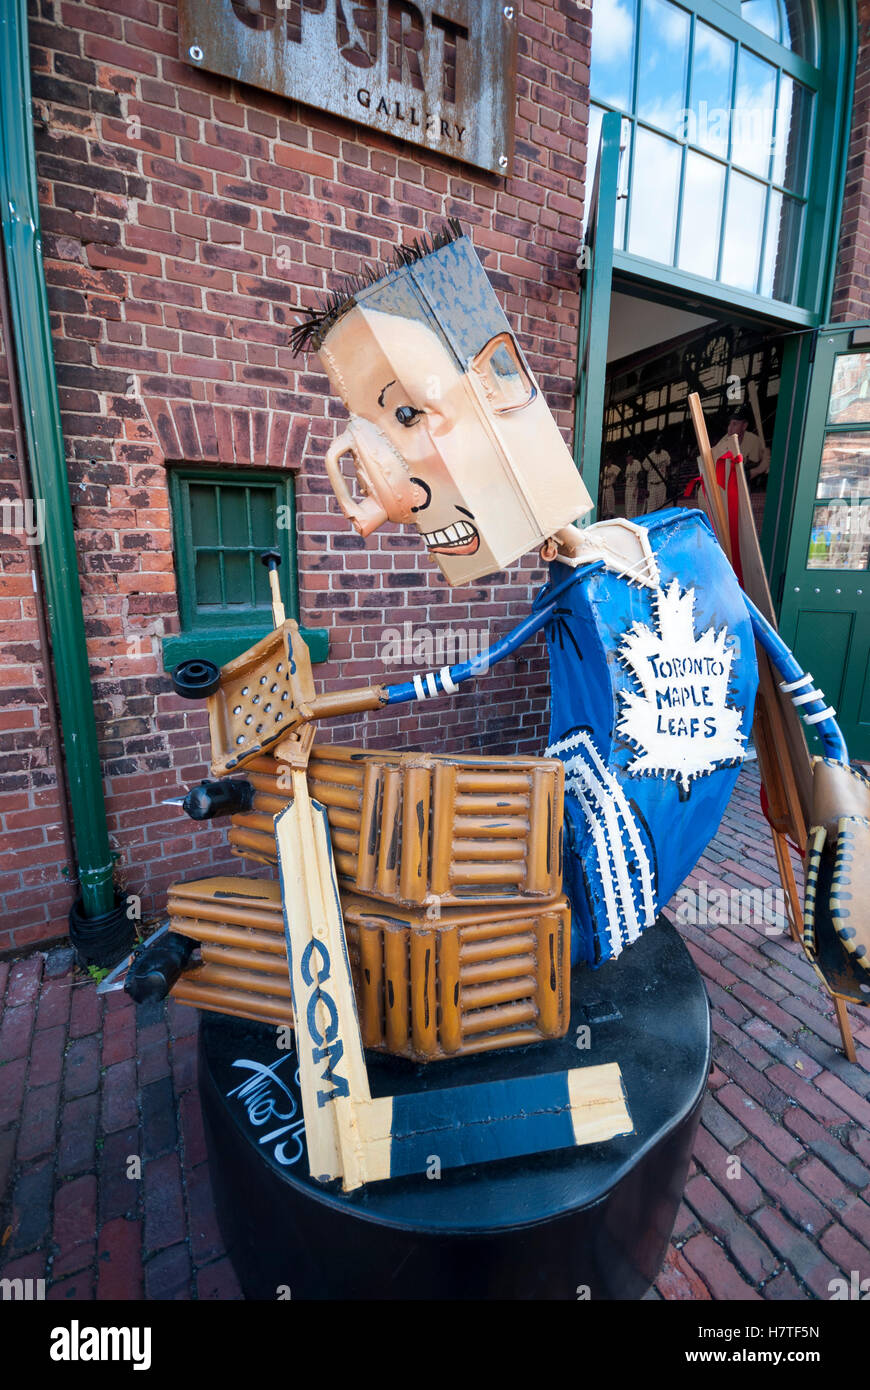 A 'junk art'  sculpture of a hockey goalie by Patrick Amiot on display in the Distillery district of Toronto Canada Stock Photo